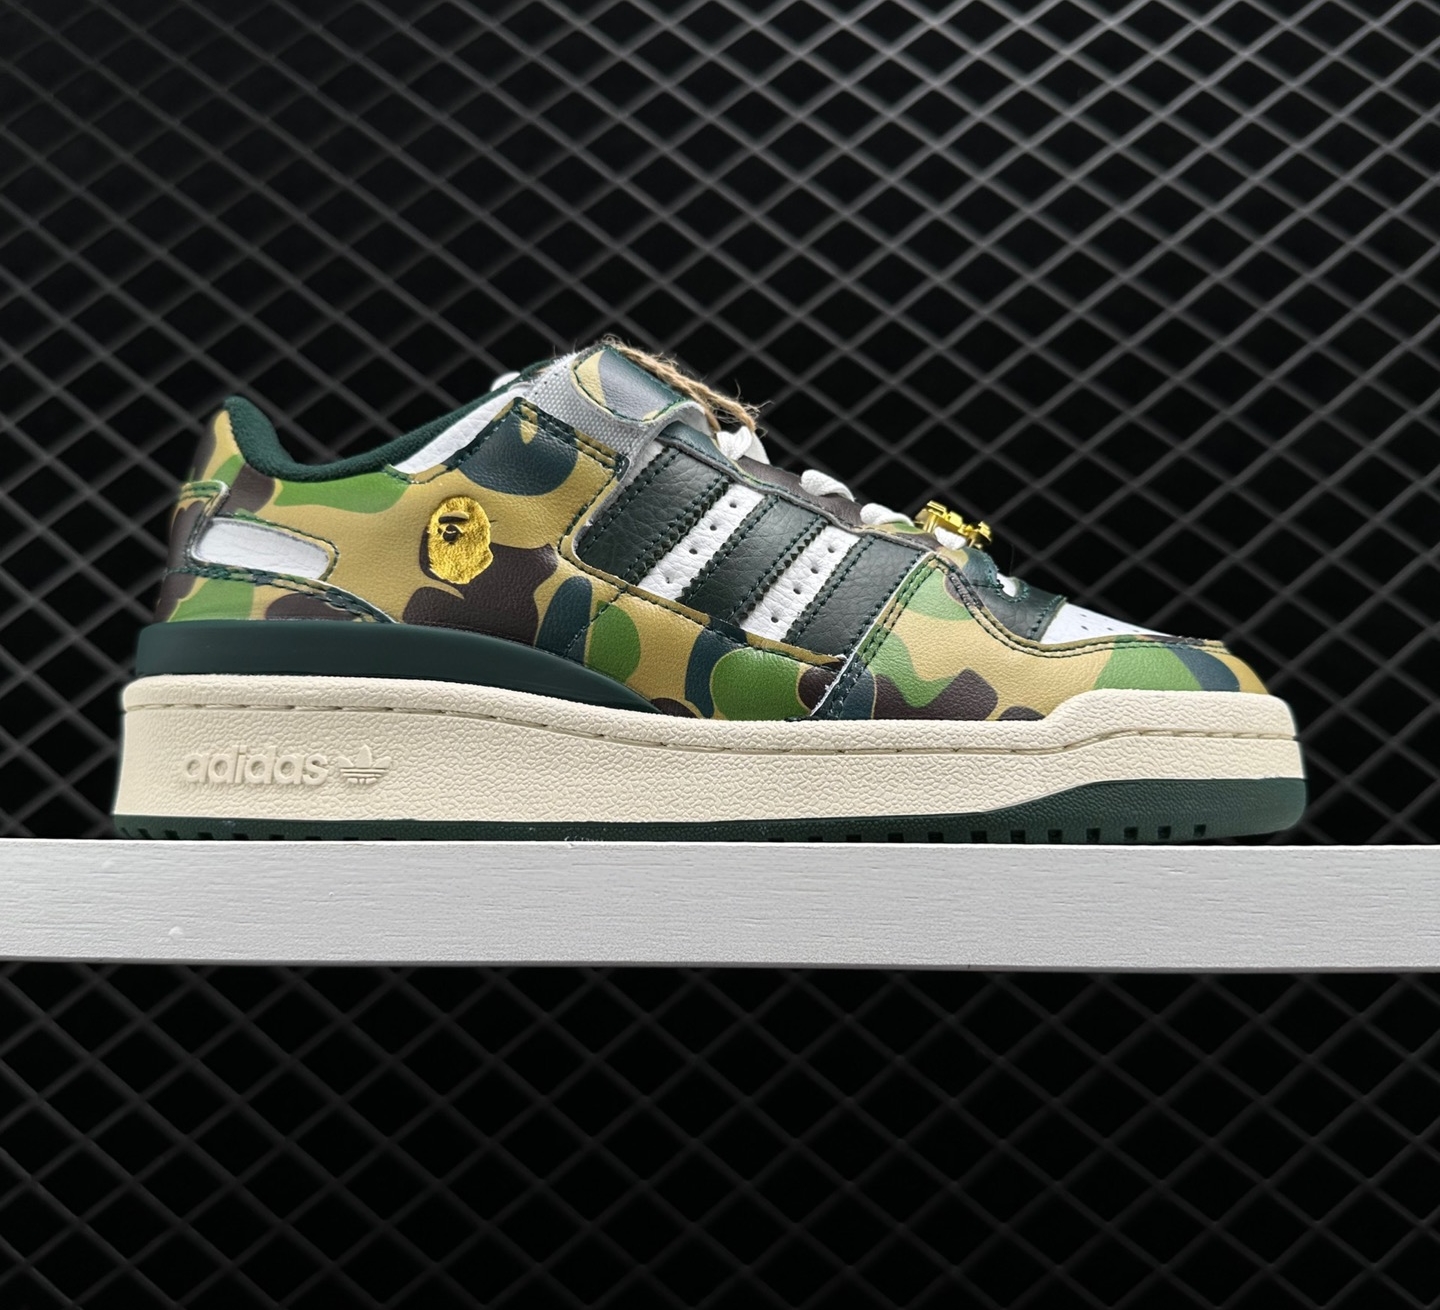 Adidas Forum Low 84 x BAPE '30th Anniversary - Green Camo' | Limited Edition Sneakers